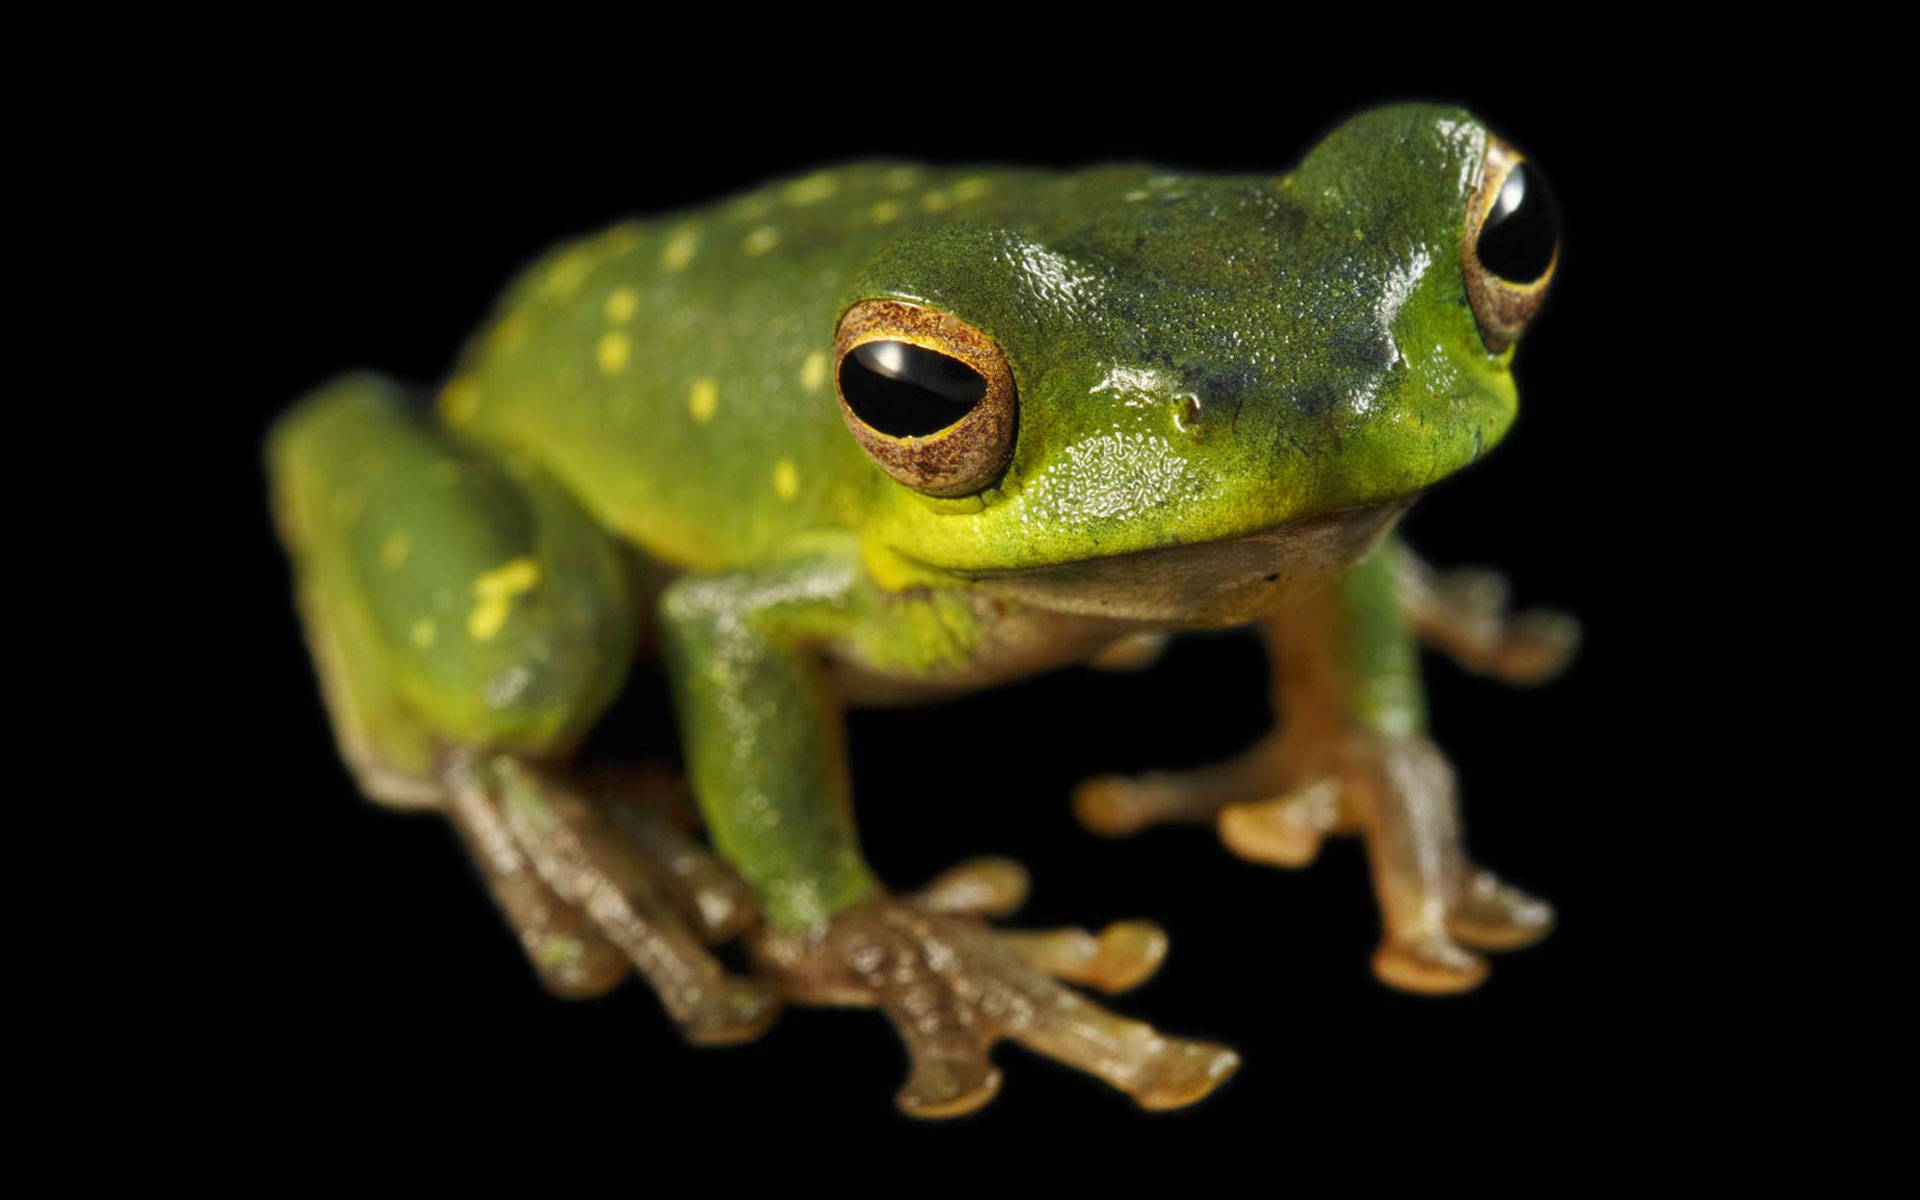 Cute Frog With Shiny Green Skin Wallpaper